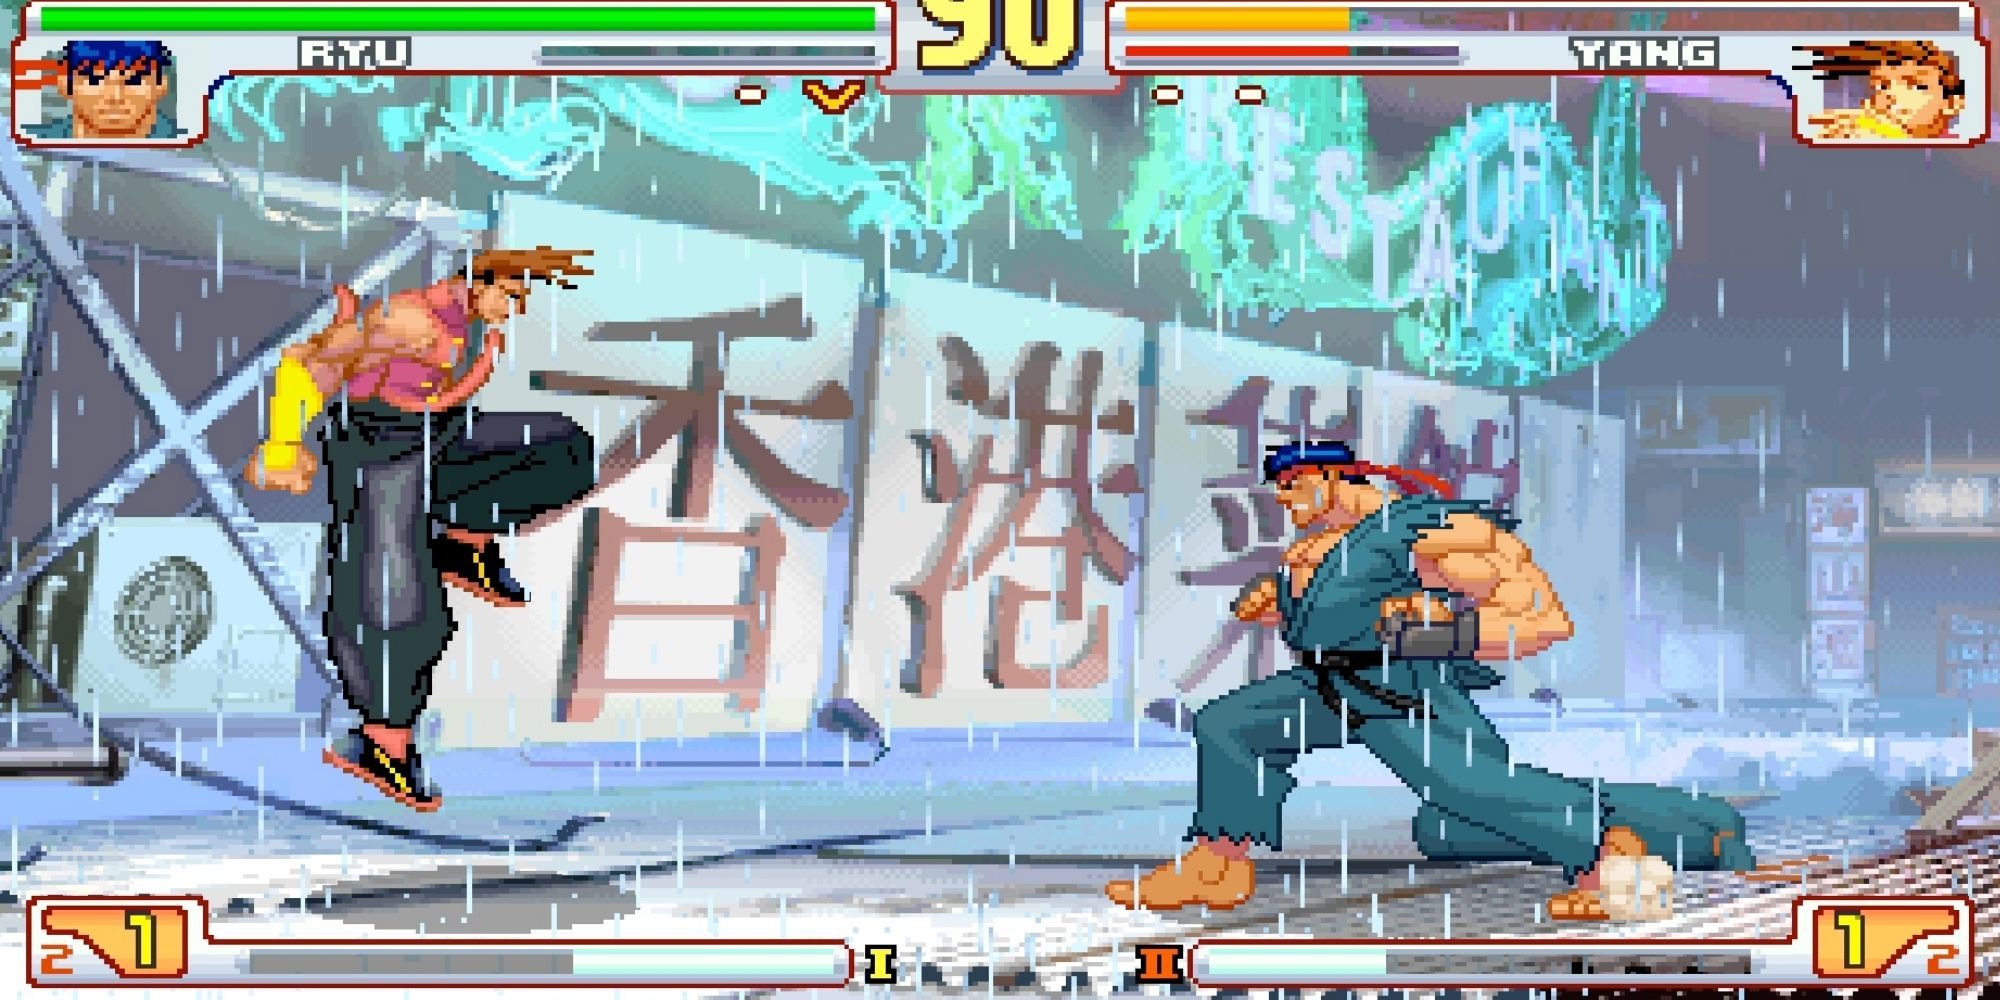 Yang jumps to counter an attack from Ryu in Street Fighter III: 3rd Strike from the Anniversary Collection